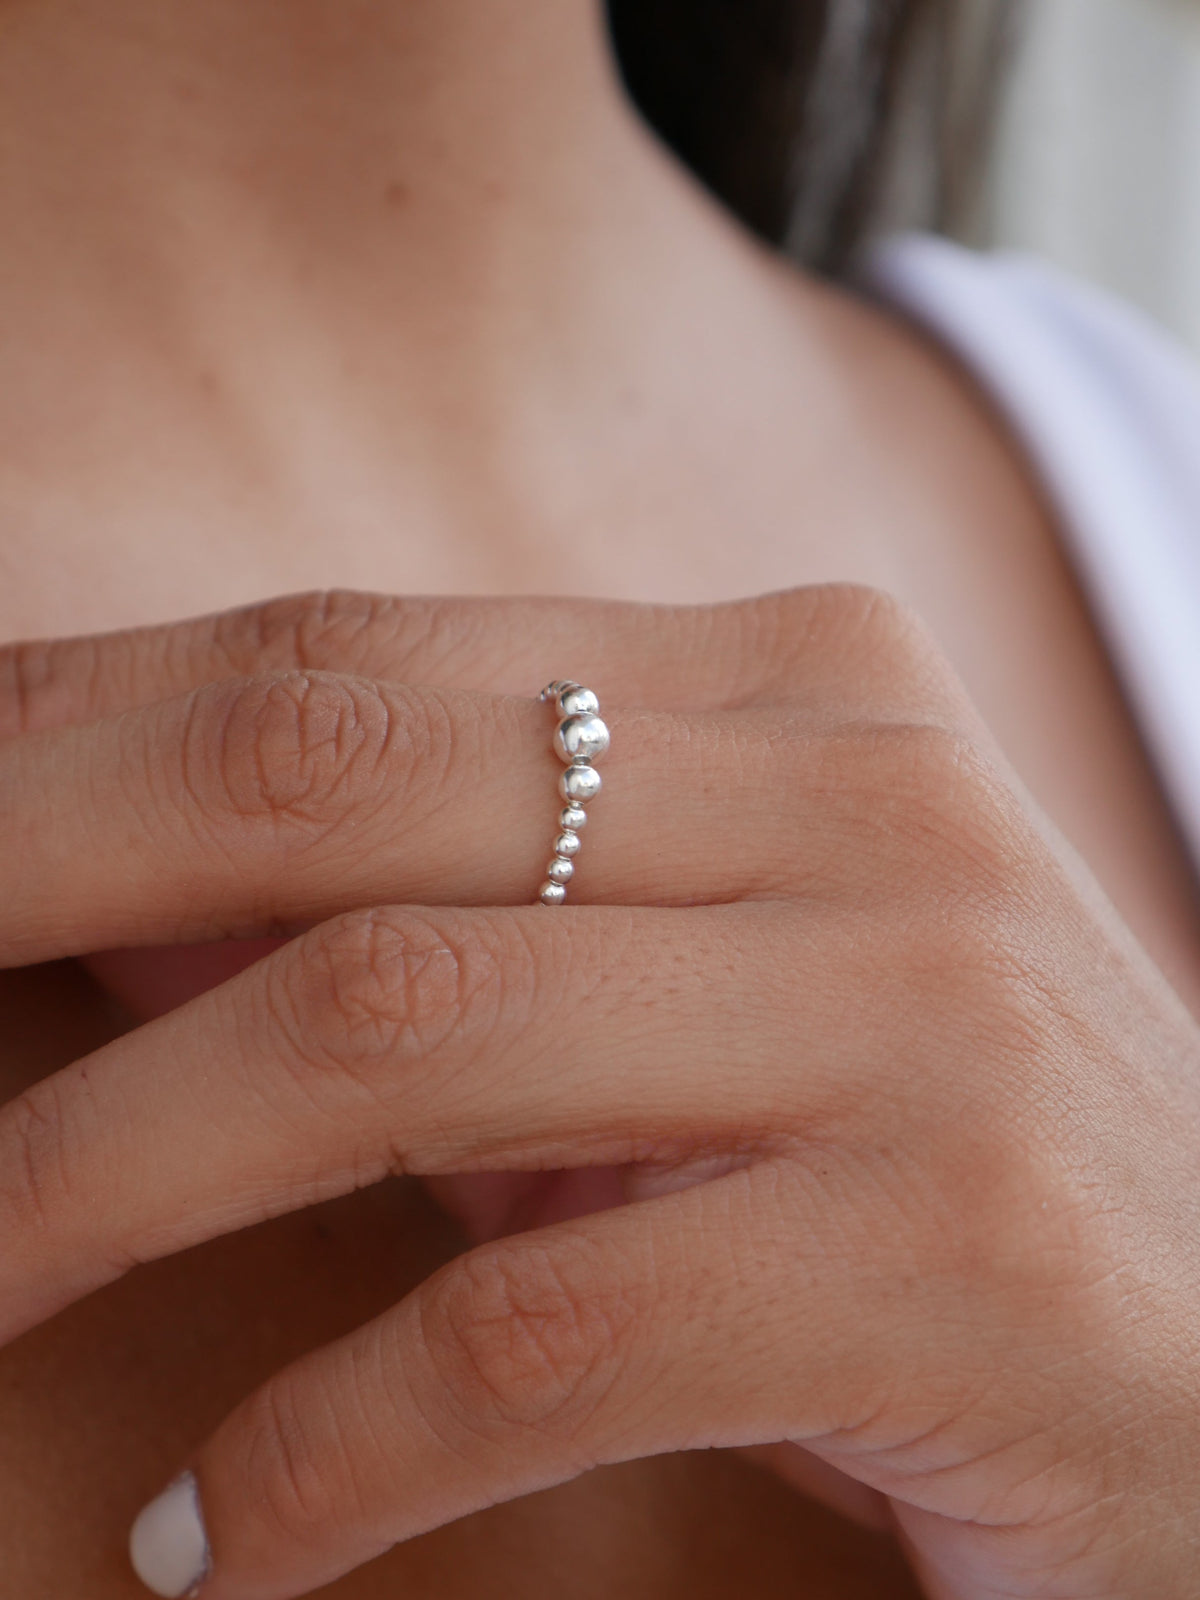 rings, silver ring, dainty rings, ball ring, silver rings, jewelry, dainty rings, accessories, trending jewelry, tiktok, nice rings, ball jewelry, fine jewelry, fashion jewelry, minimalist rings, statement rings, 925 rings, white gold, kesley jewelry, miami, brickell, nice rings, cool rings, unique rings, gift ideas, casual rings, rings that wont tarnish with water  , fashion jewelry, fine jewelry, designer rings, tiffanys, pandora jewelry, nice rings